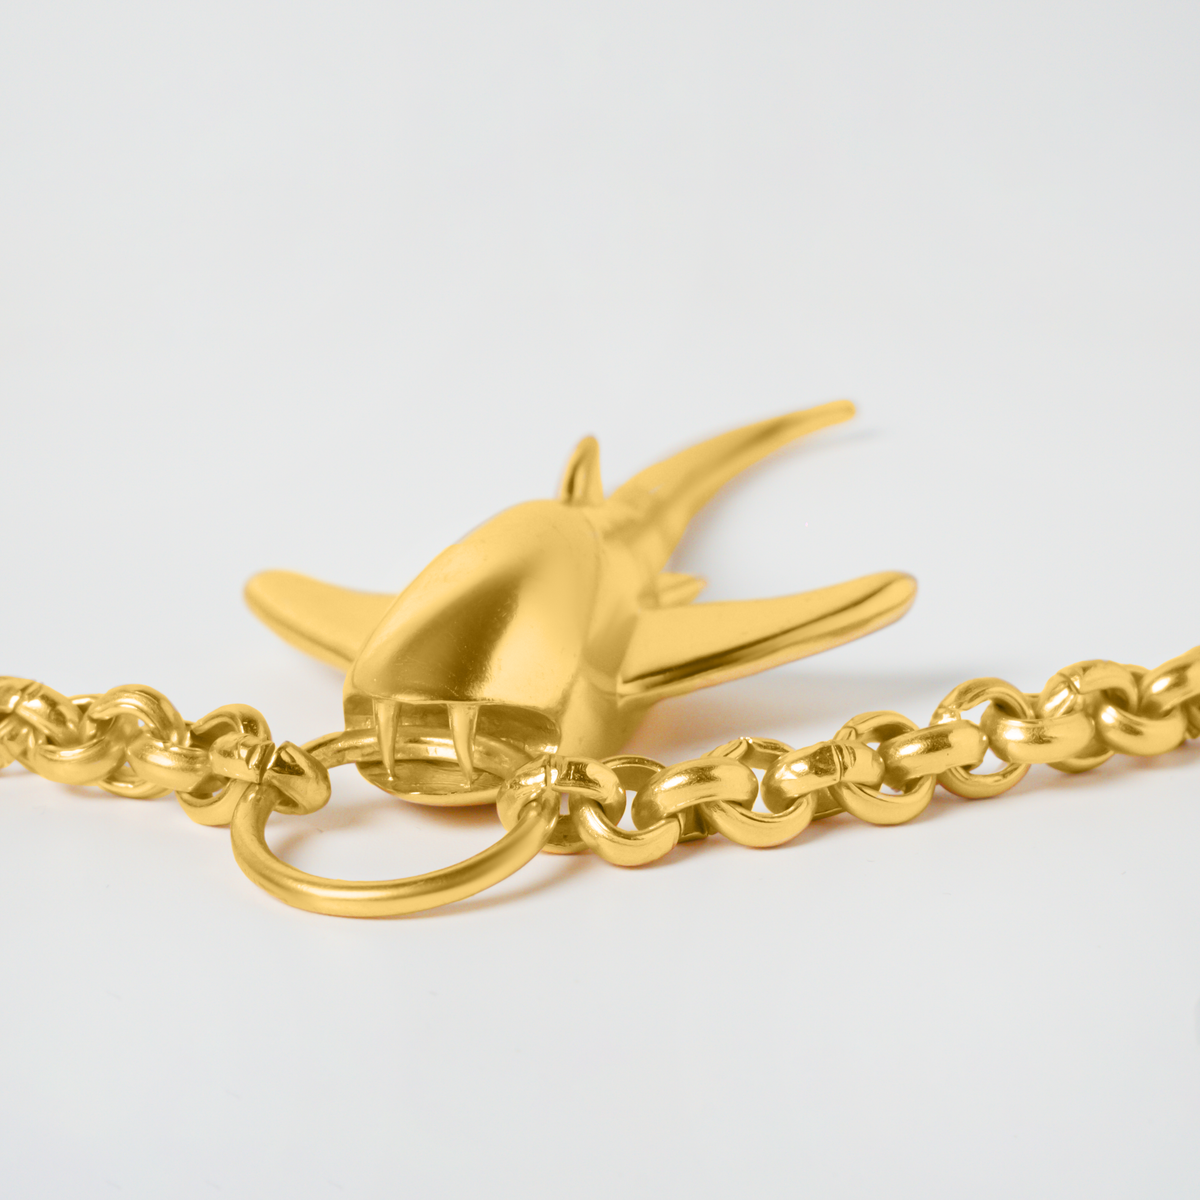 Shark Necklace - Gold Tone